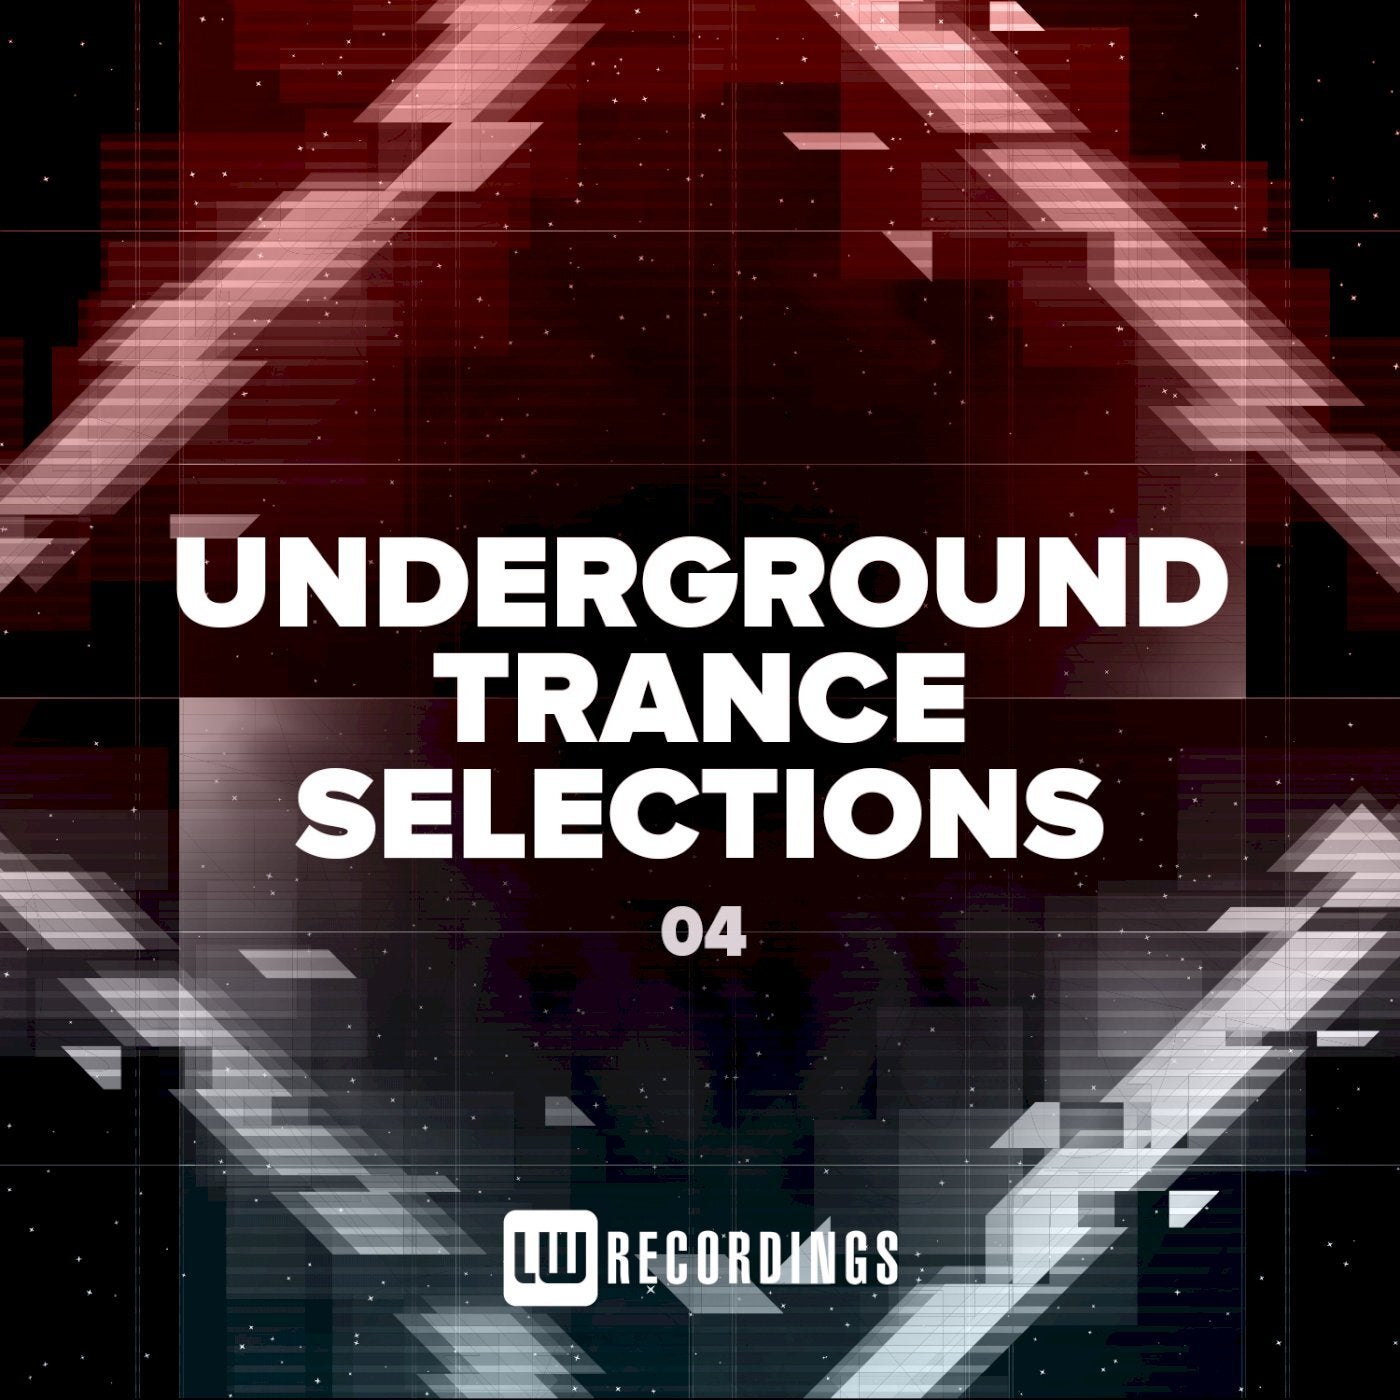 Underground Trance Selections, Vol. 04